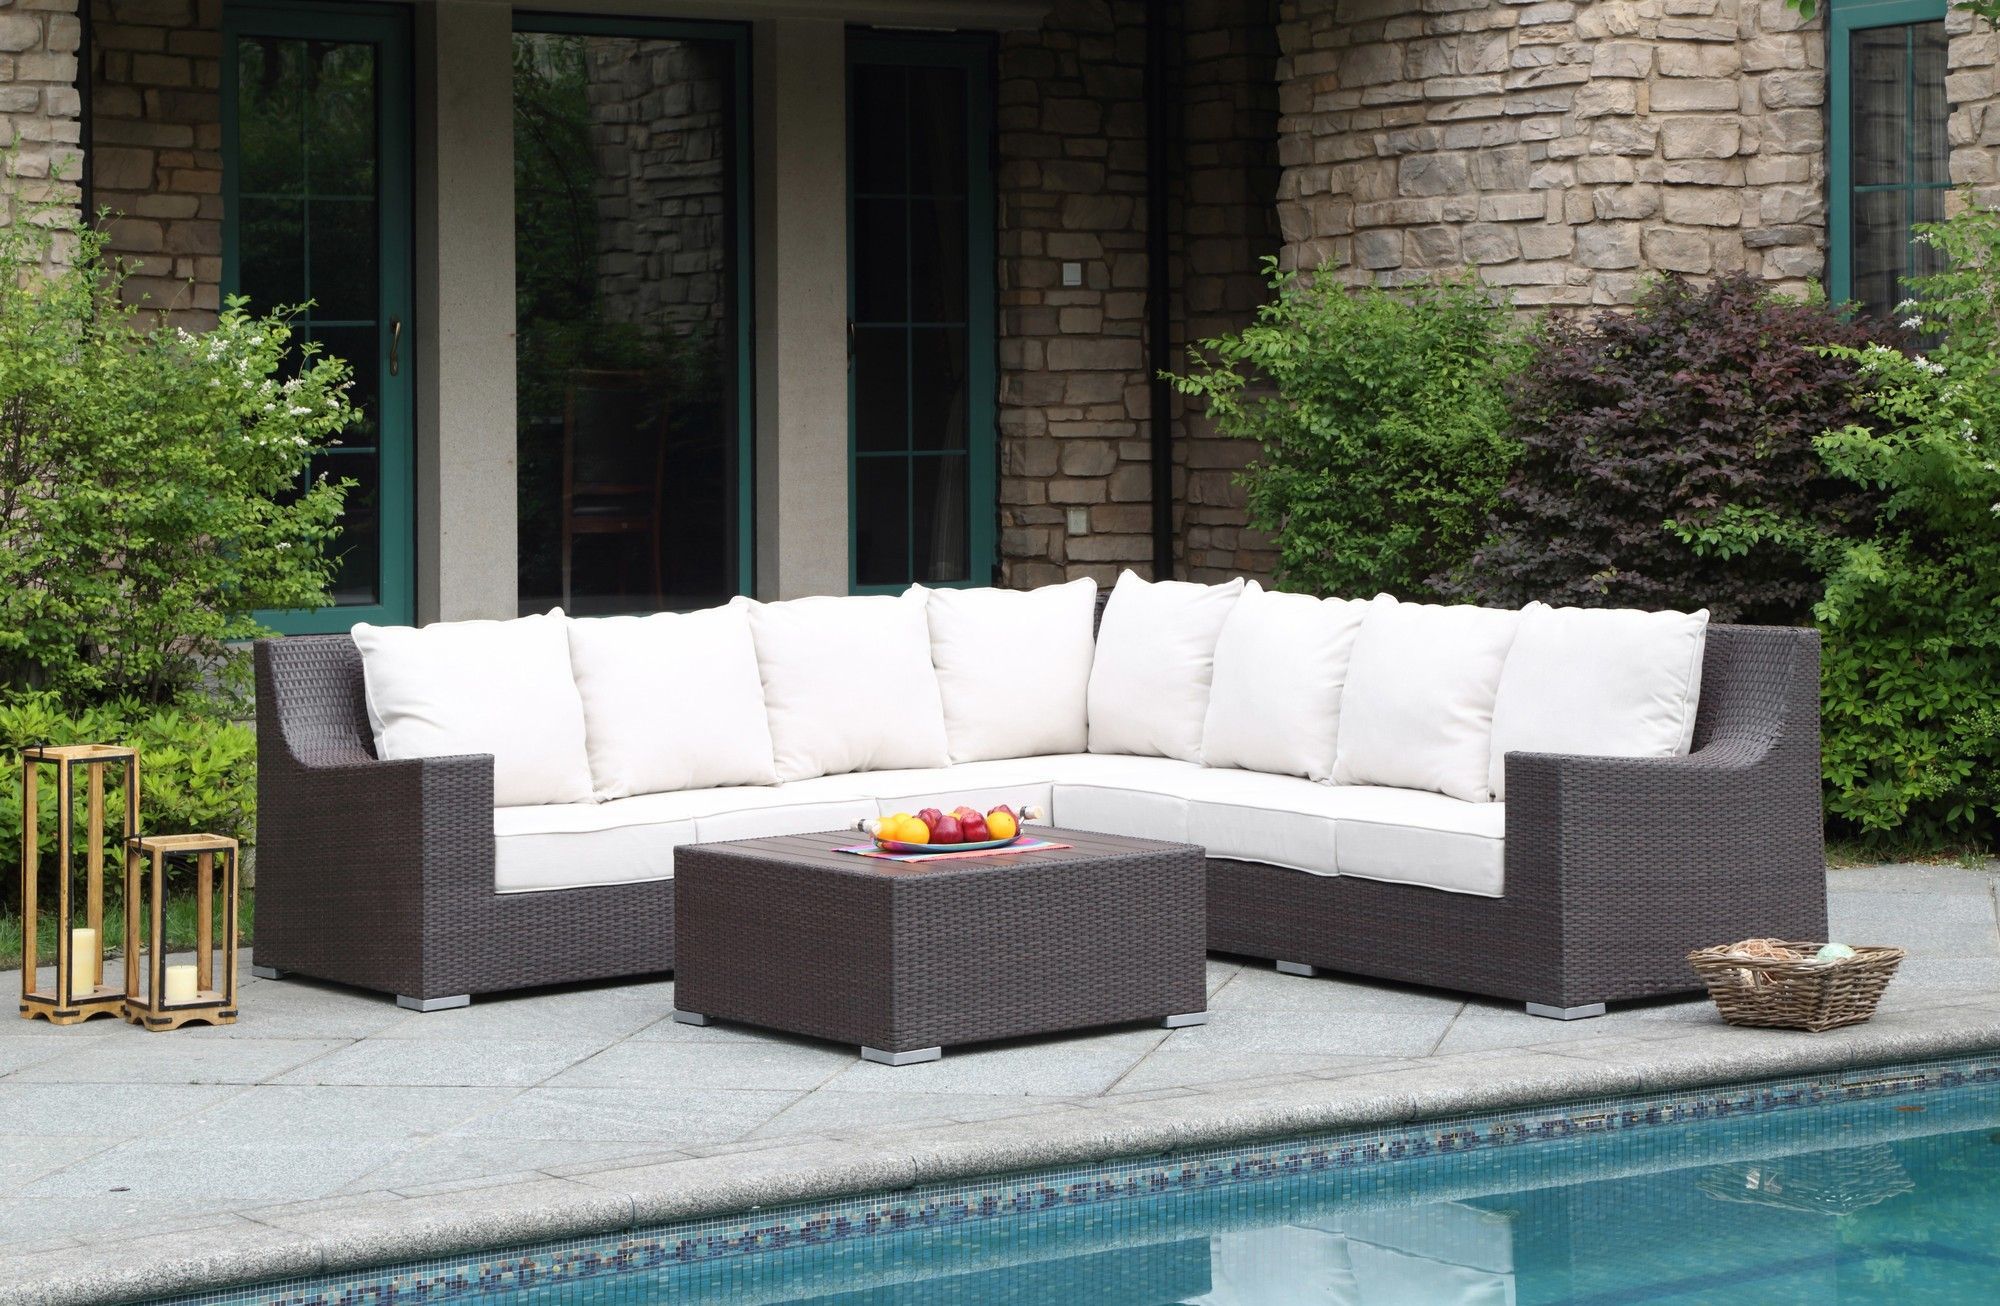 Panama 4 Piece Deep Seating Group | Outdoor Furniture Sets, Patio With 4 Piece Outdoor Seating Patio Sets (View 12 of 15)